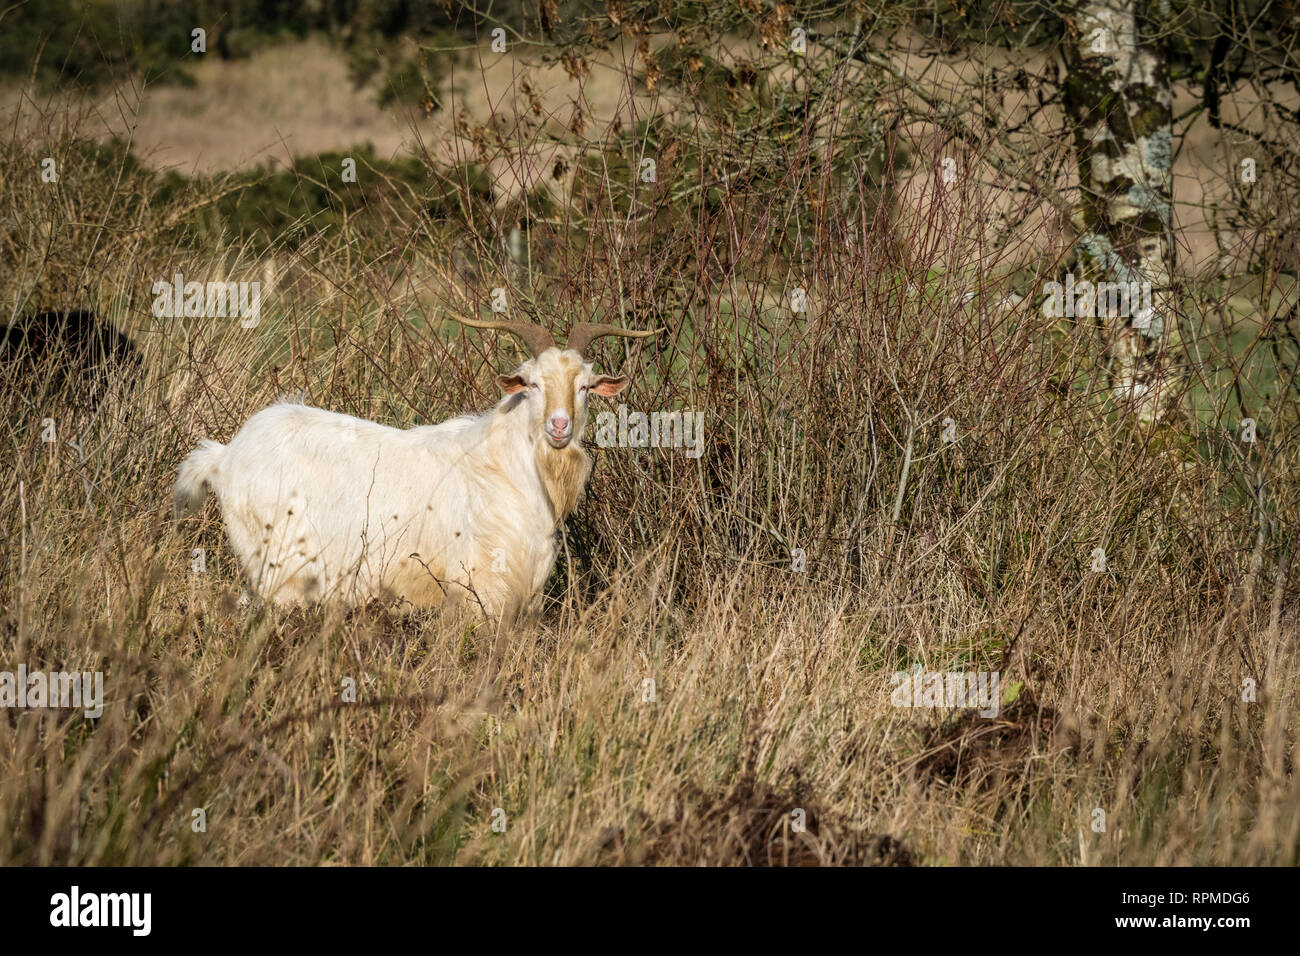 A wild goat roaming free in the Irish countryside Stock Photo